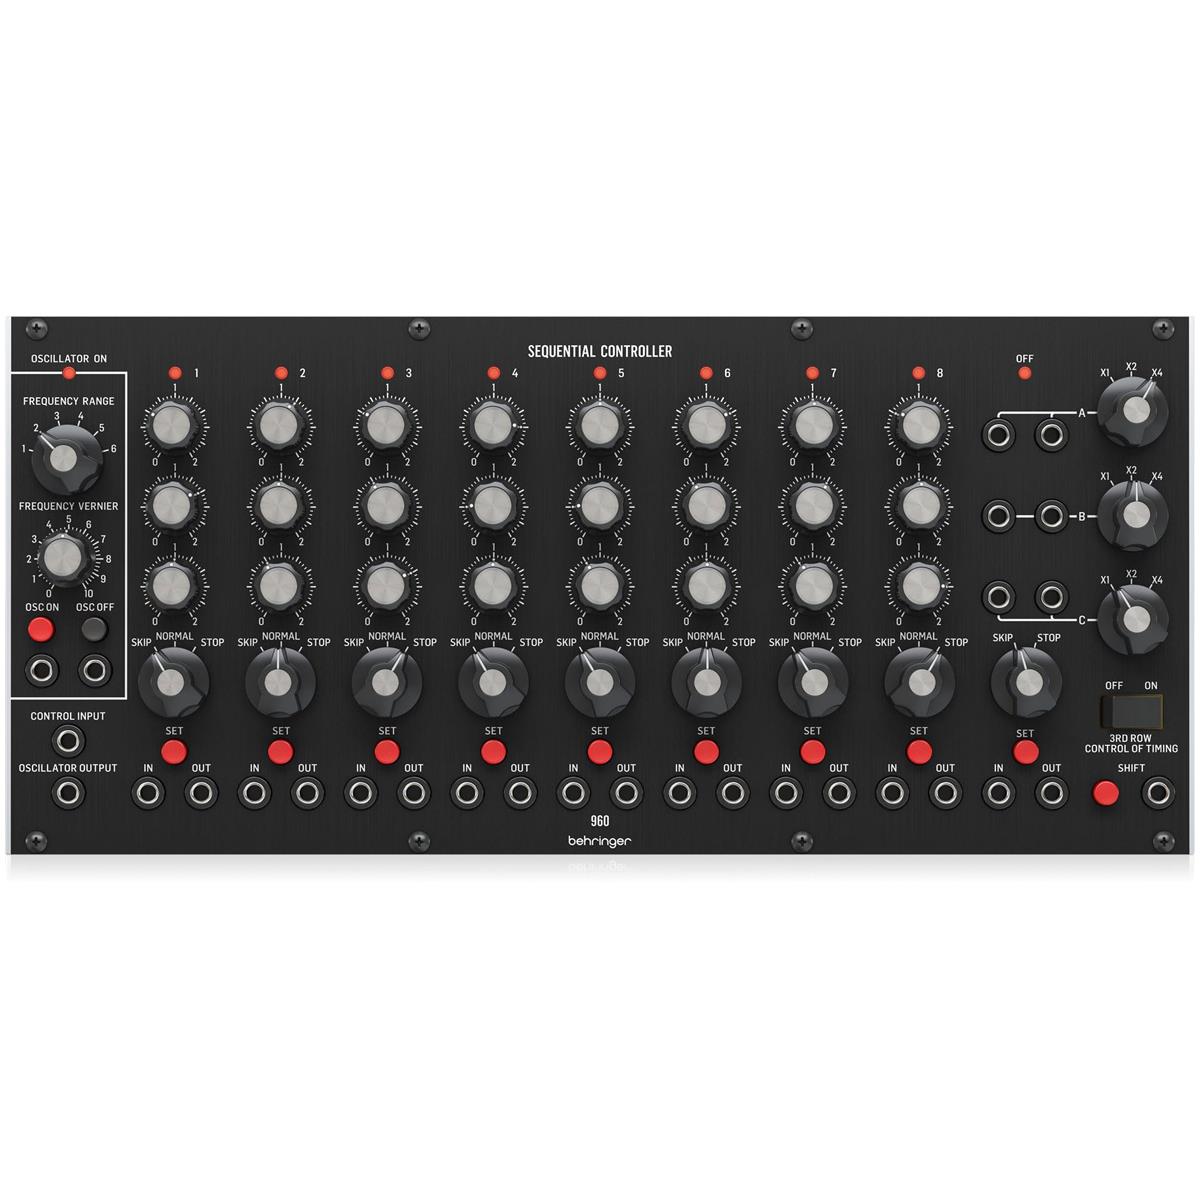 Image of Behringer 960 Sequential Controller Legendary Analog Step Sequencer Module